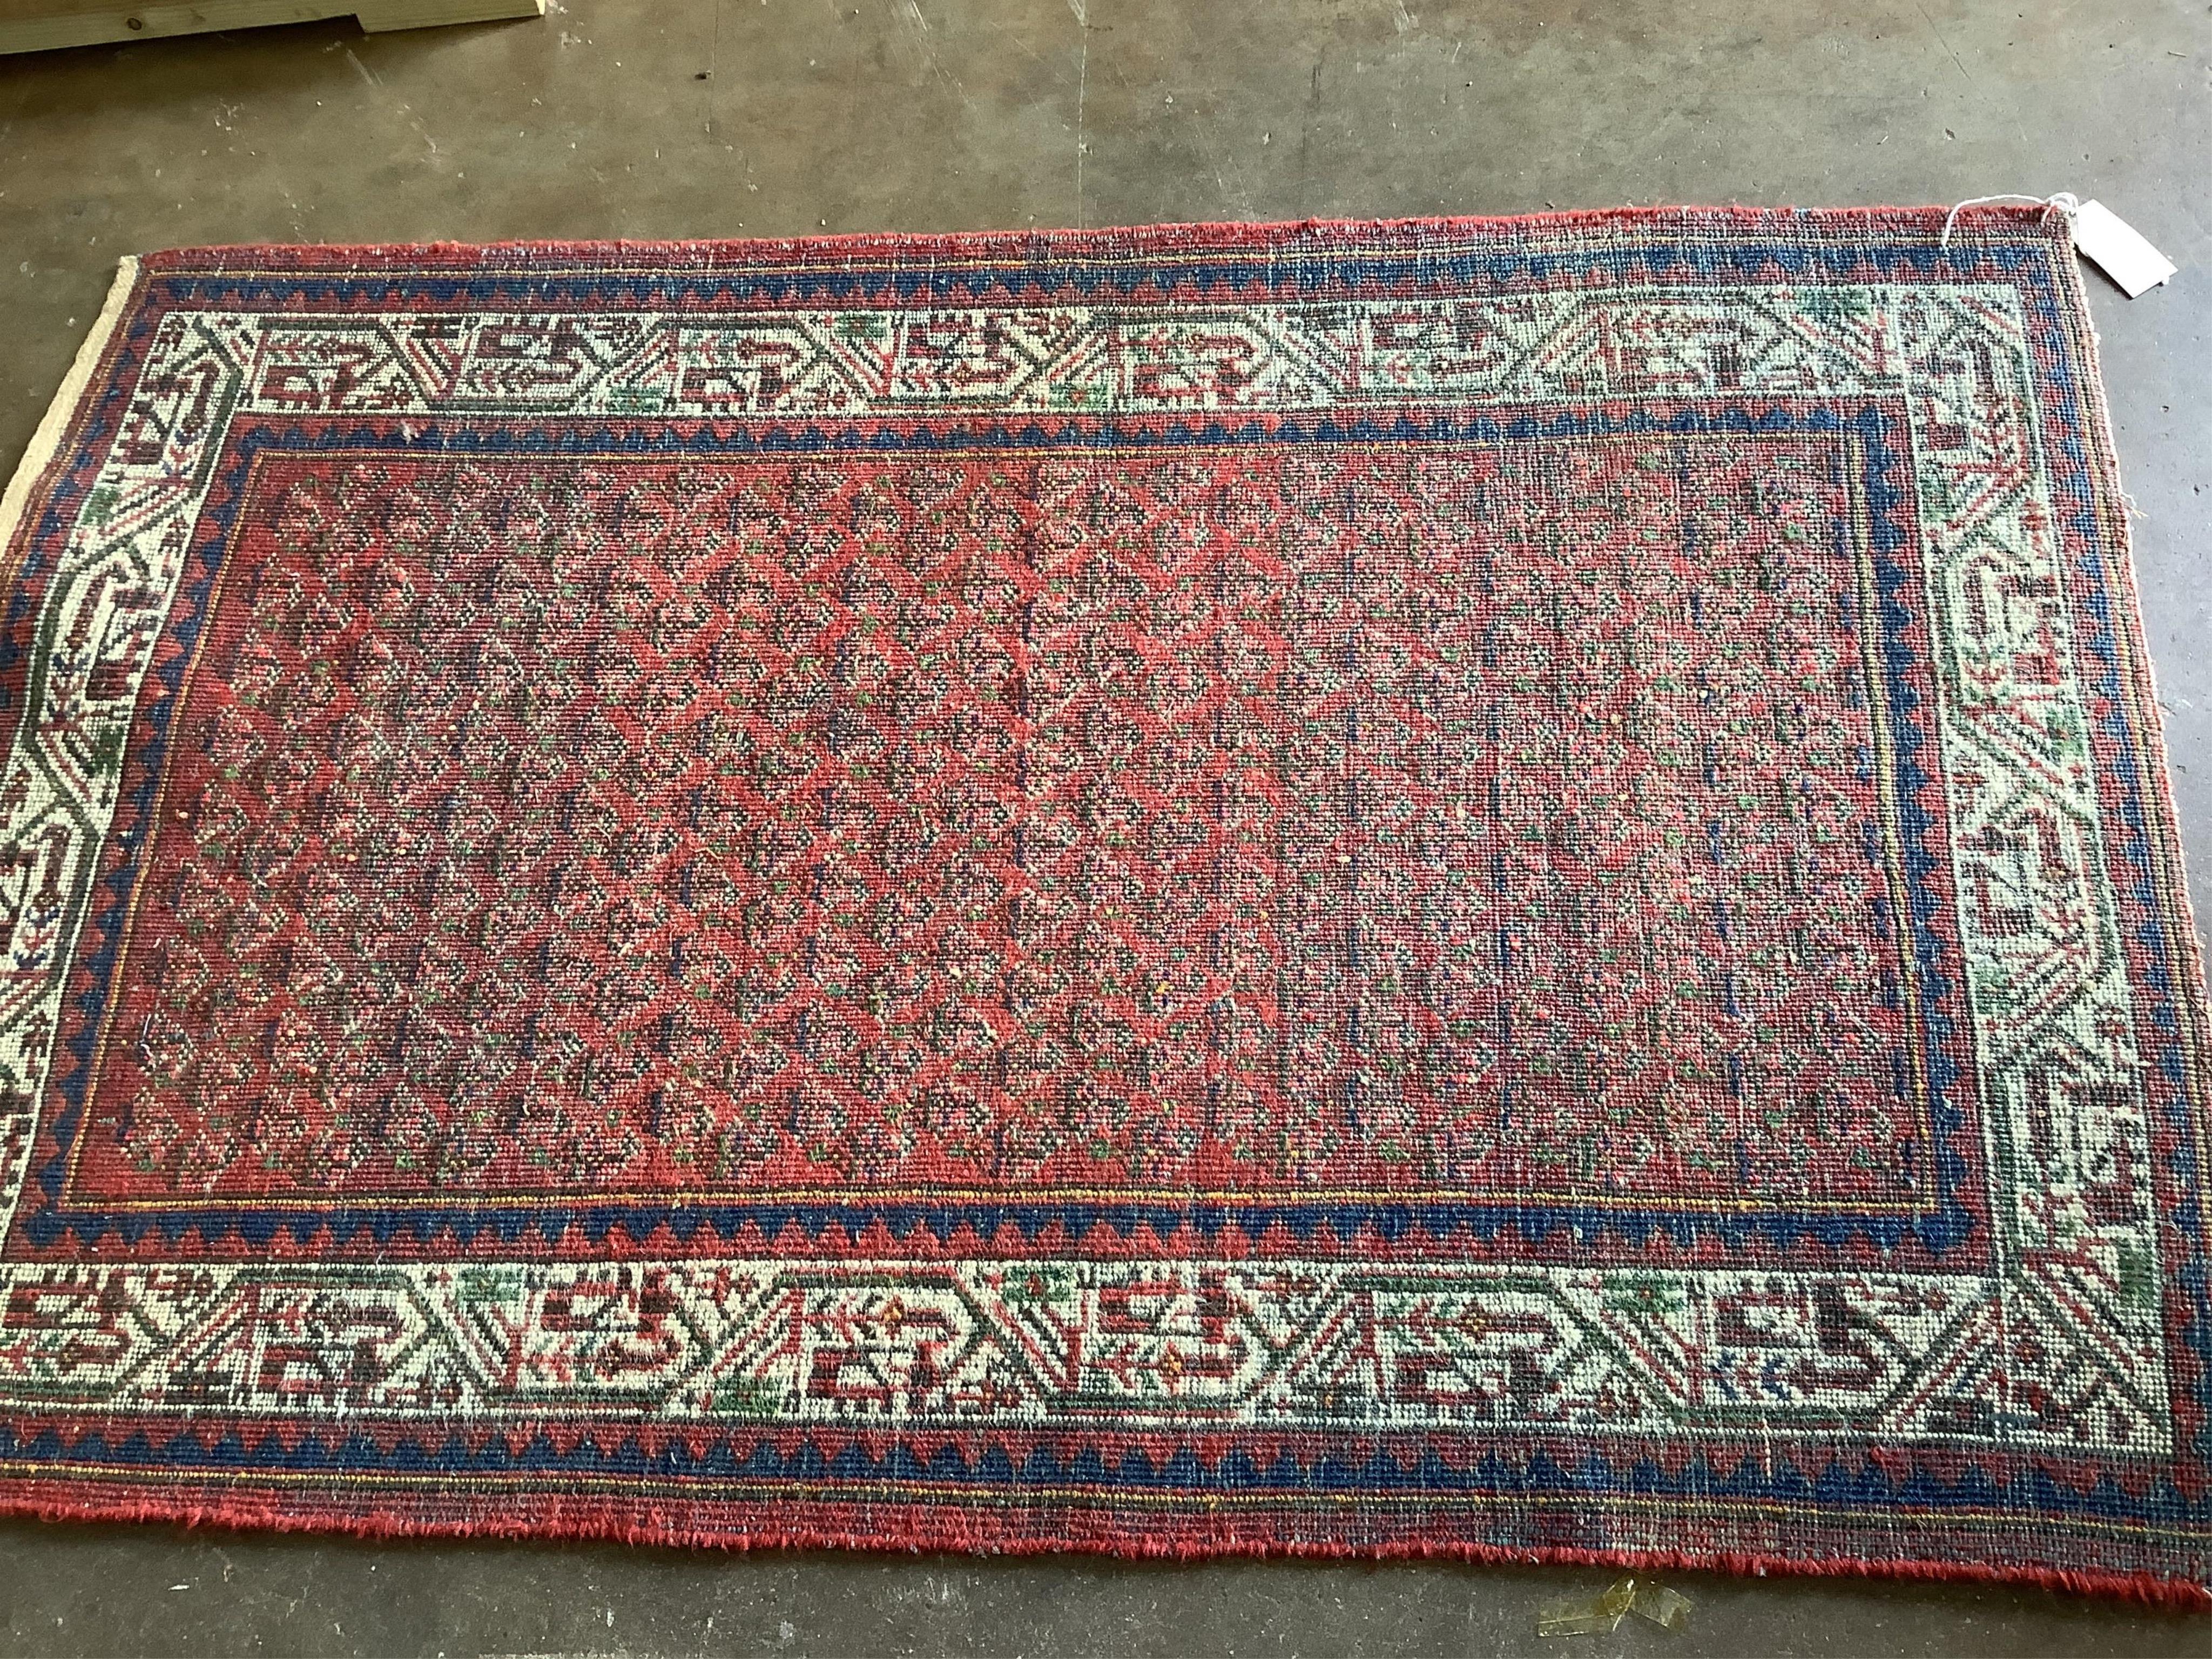 A pair of North West Persian brick red ground rugs, each 124 x 79cm. Condition - fair